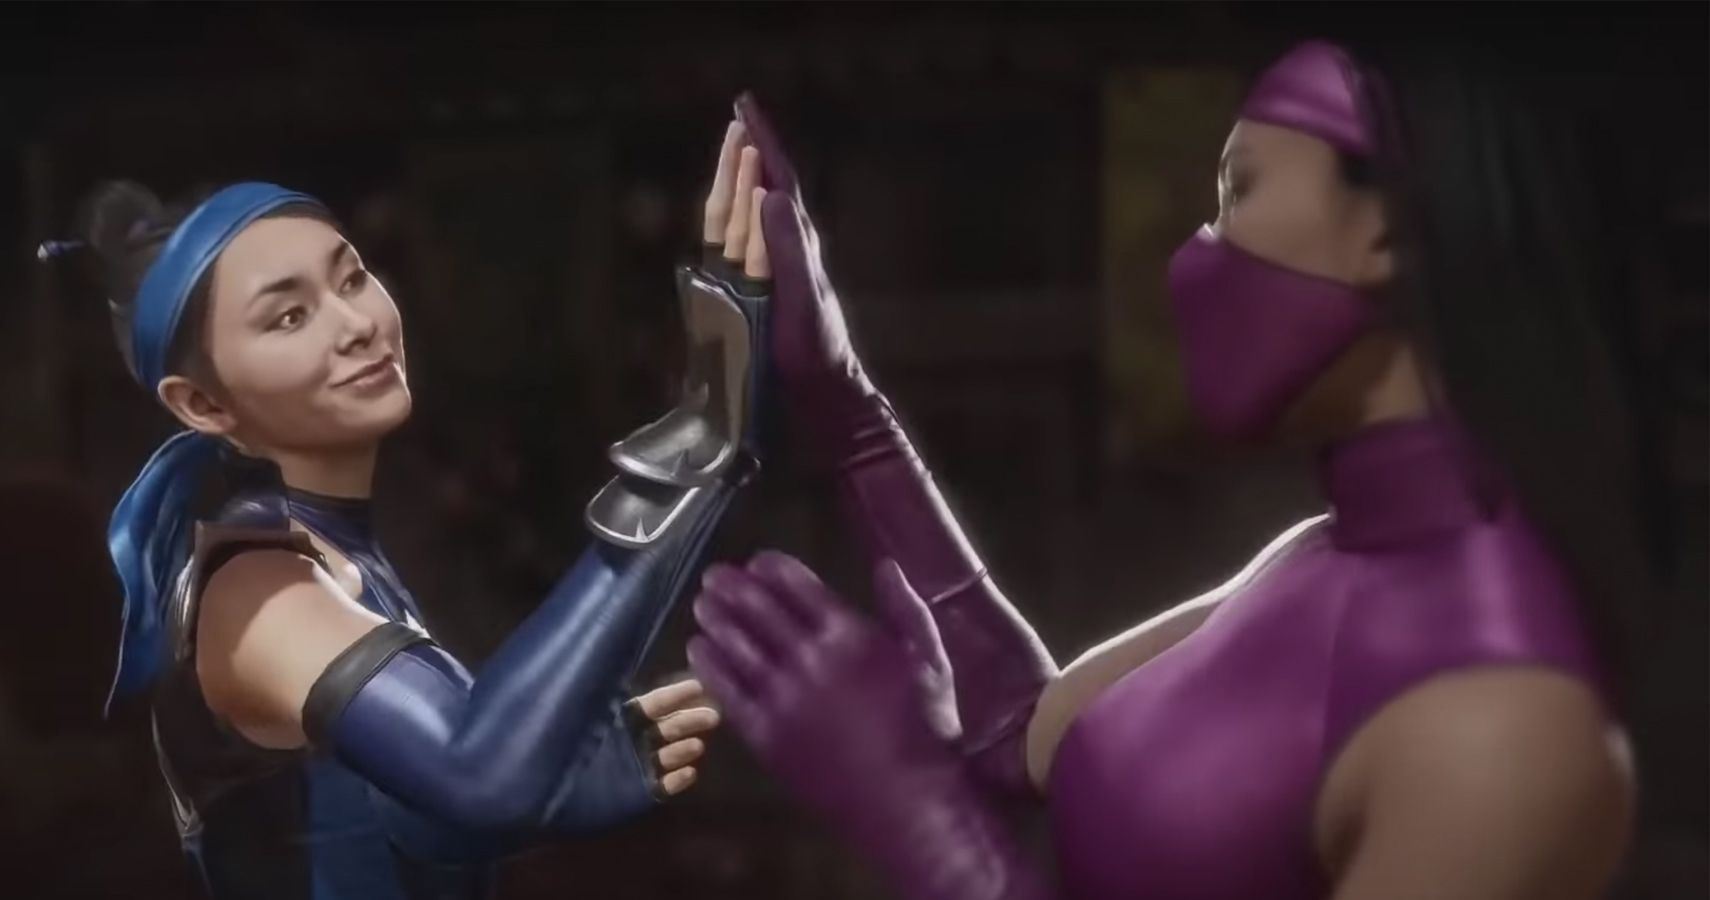 Mortal Kombat Player Disqualified From Tournament For Criticizing Developers